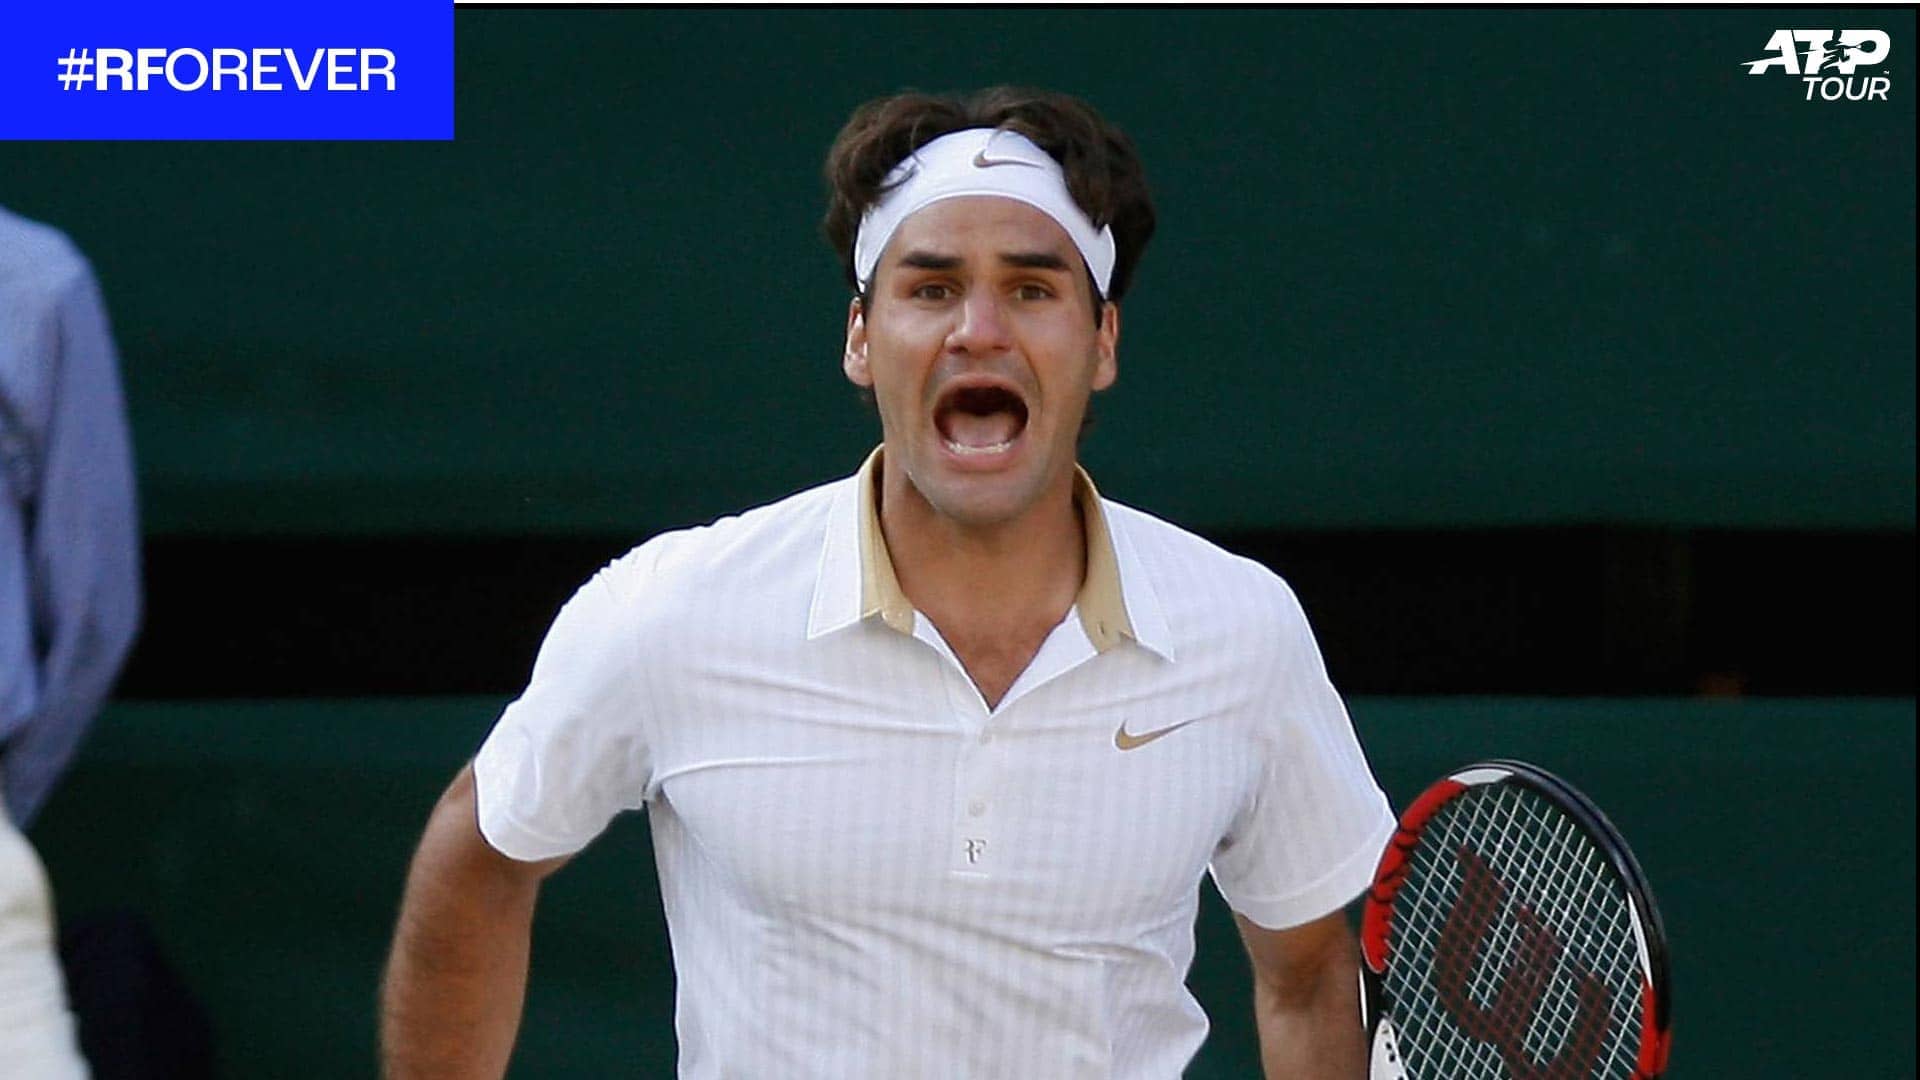 Roger Federer's most iconic matches spanned from famous victories to heartbreaking defeats.